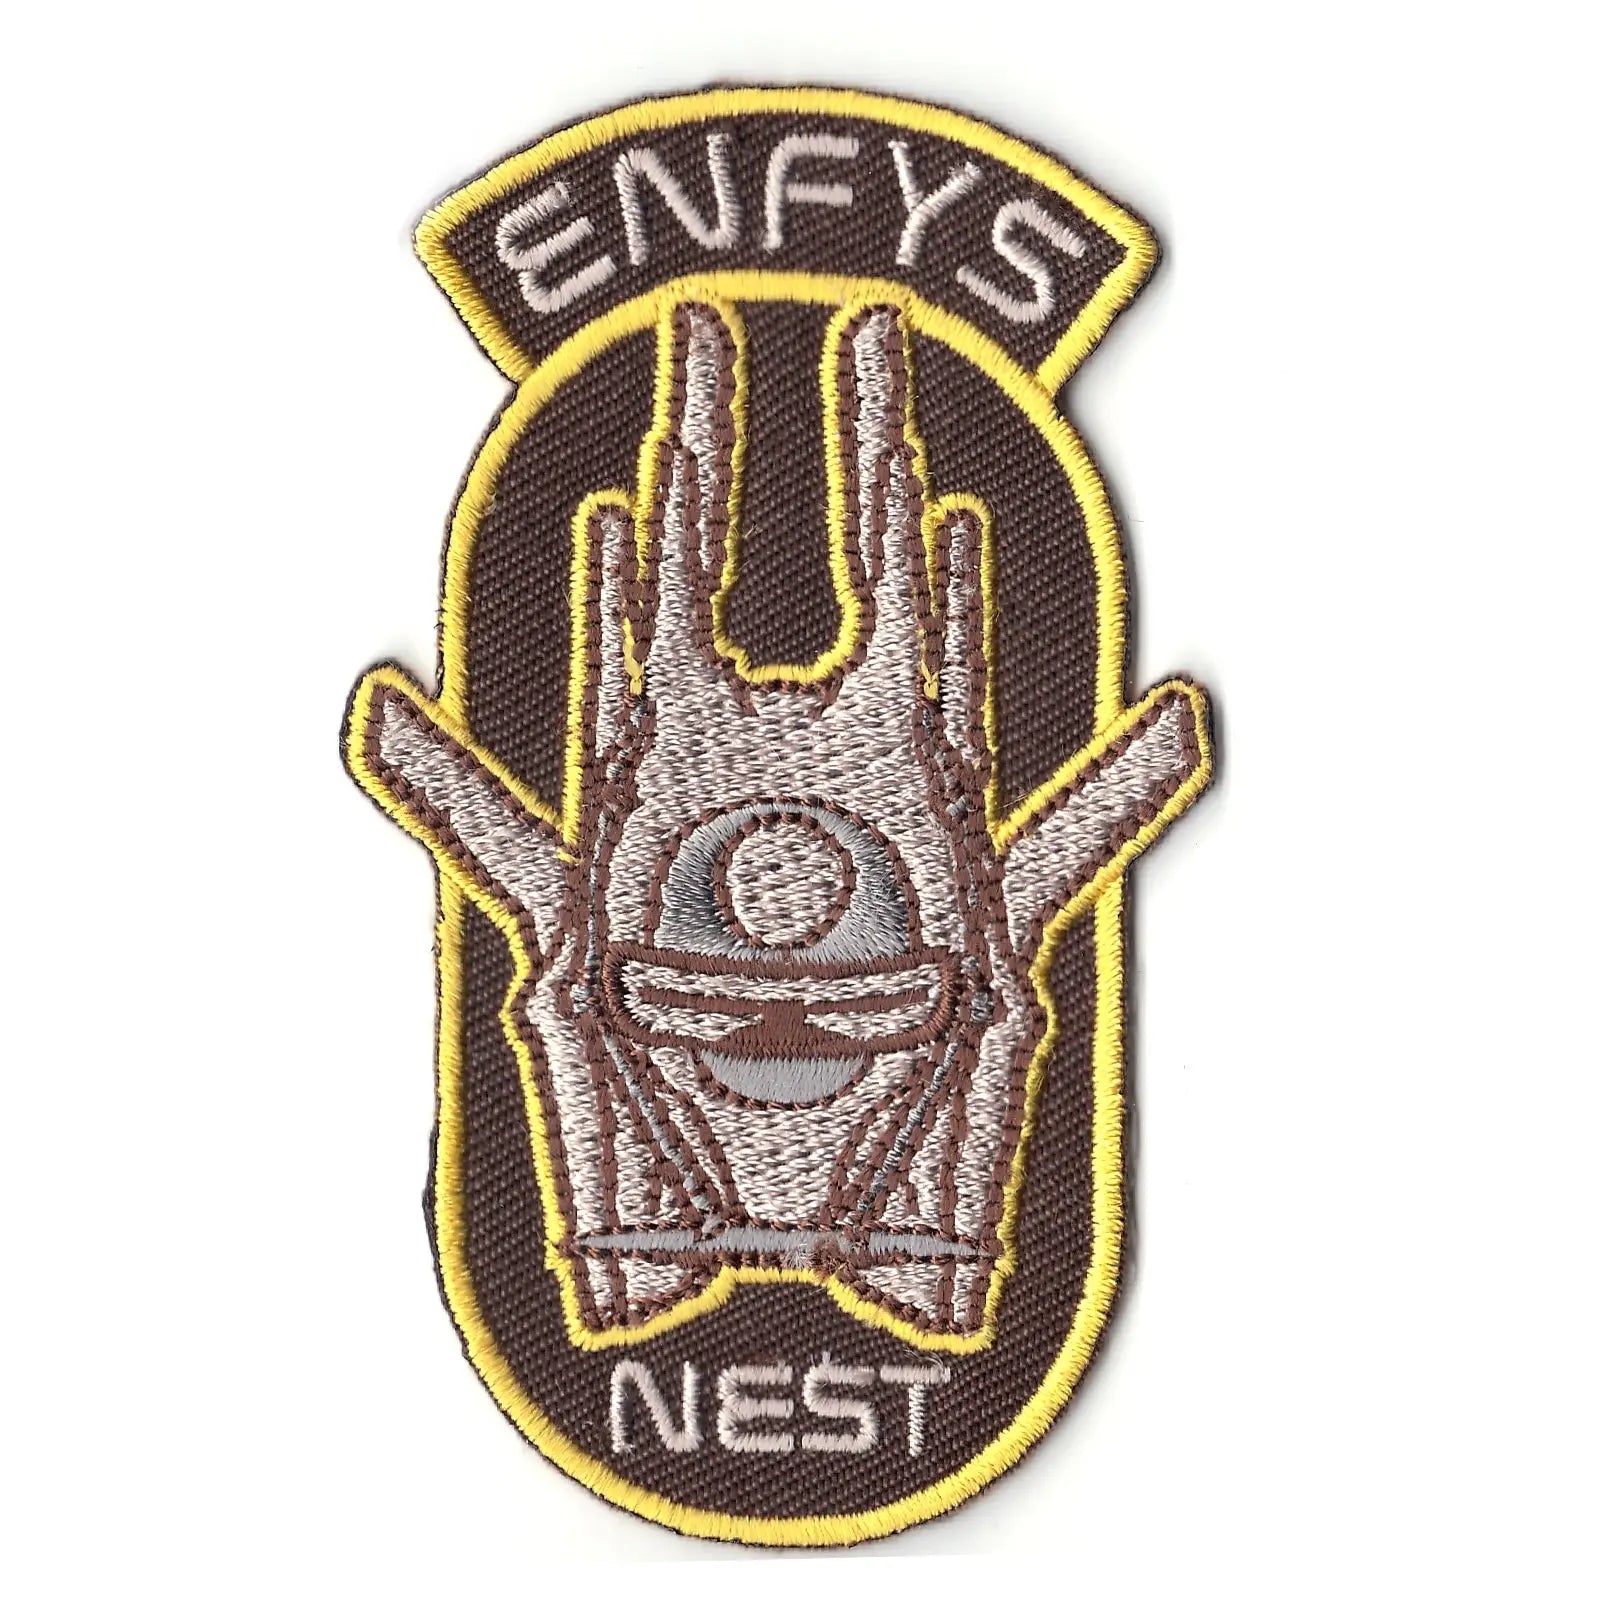 Enfys Nest Solo A Star Wars Story Logo Iron on Patch 